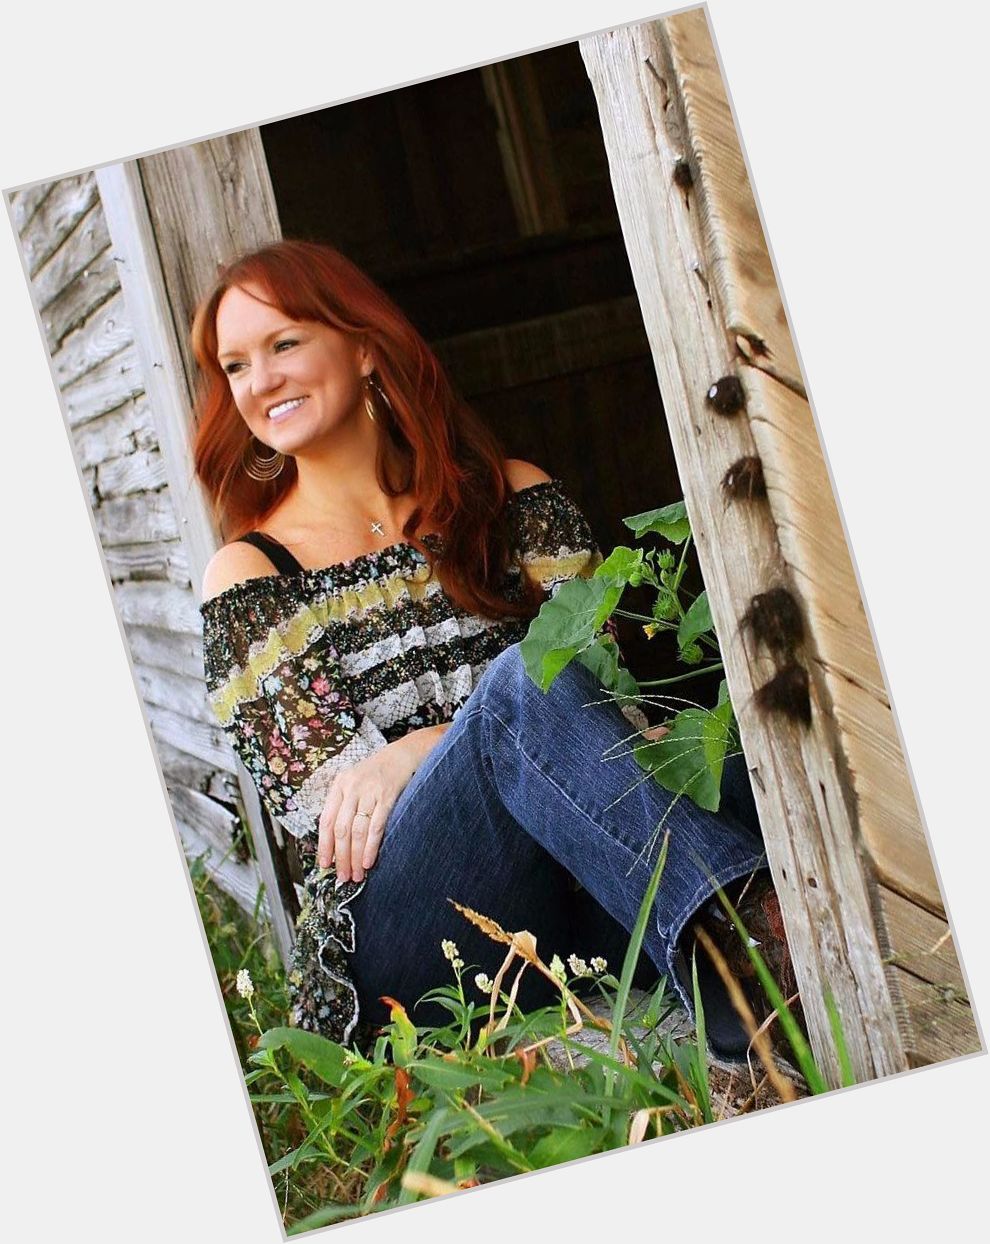 <a href="/hot-women/ree-drummond/is-she-mormon-lds-vegetarian">Ree Drummond</a> Average body,  red hair & hairstyles